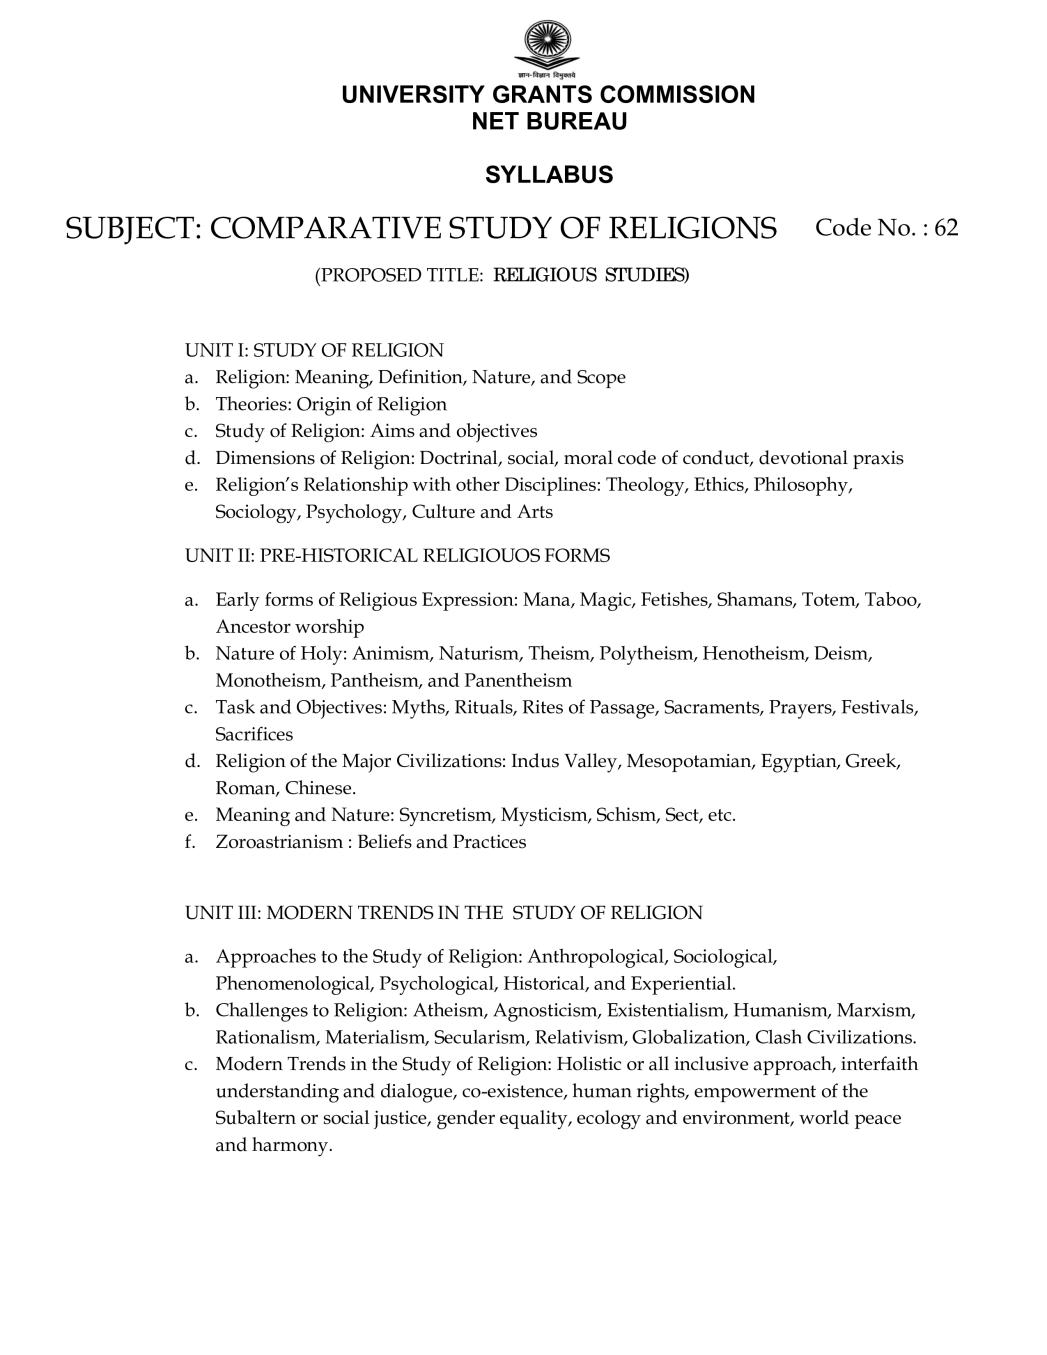 UGC NET Syllabus for	Comparative Study of Religions 2020 - Page 1